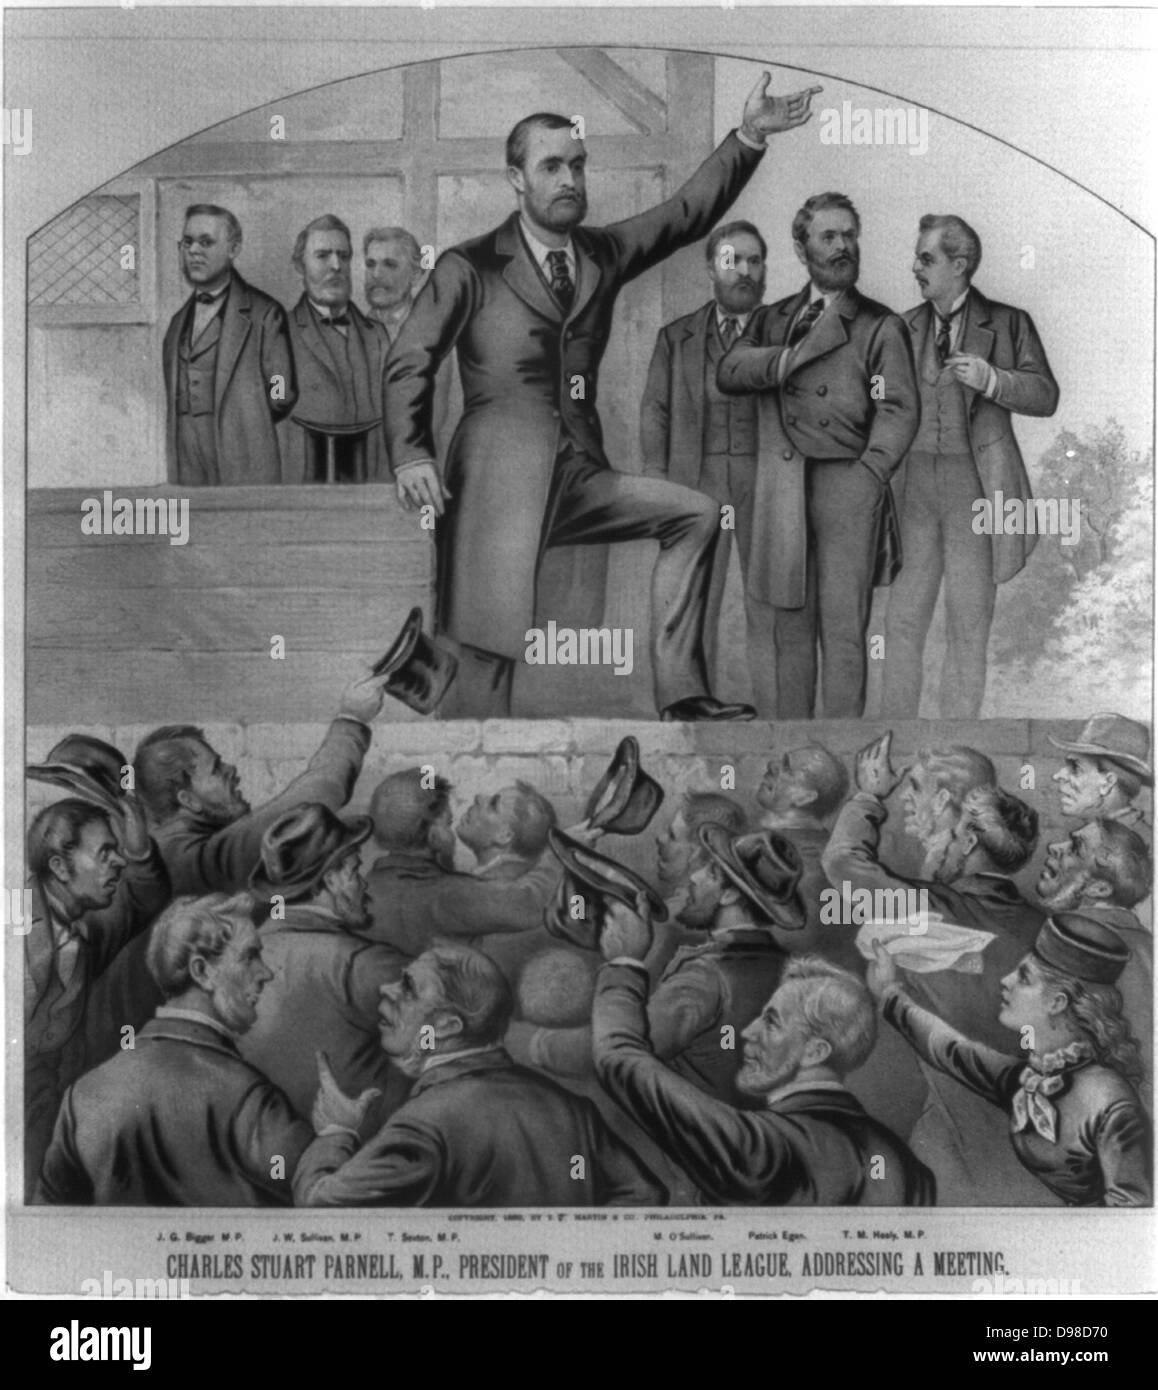 Charles Stewart Parnell (1846-1891) Irish nationalist, political leader and champion of Home Rule. Parnell, President of the Irish Land League, Addressing a Meeting. Lithograph c1883. Stock Photo